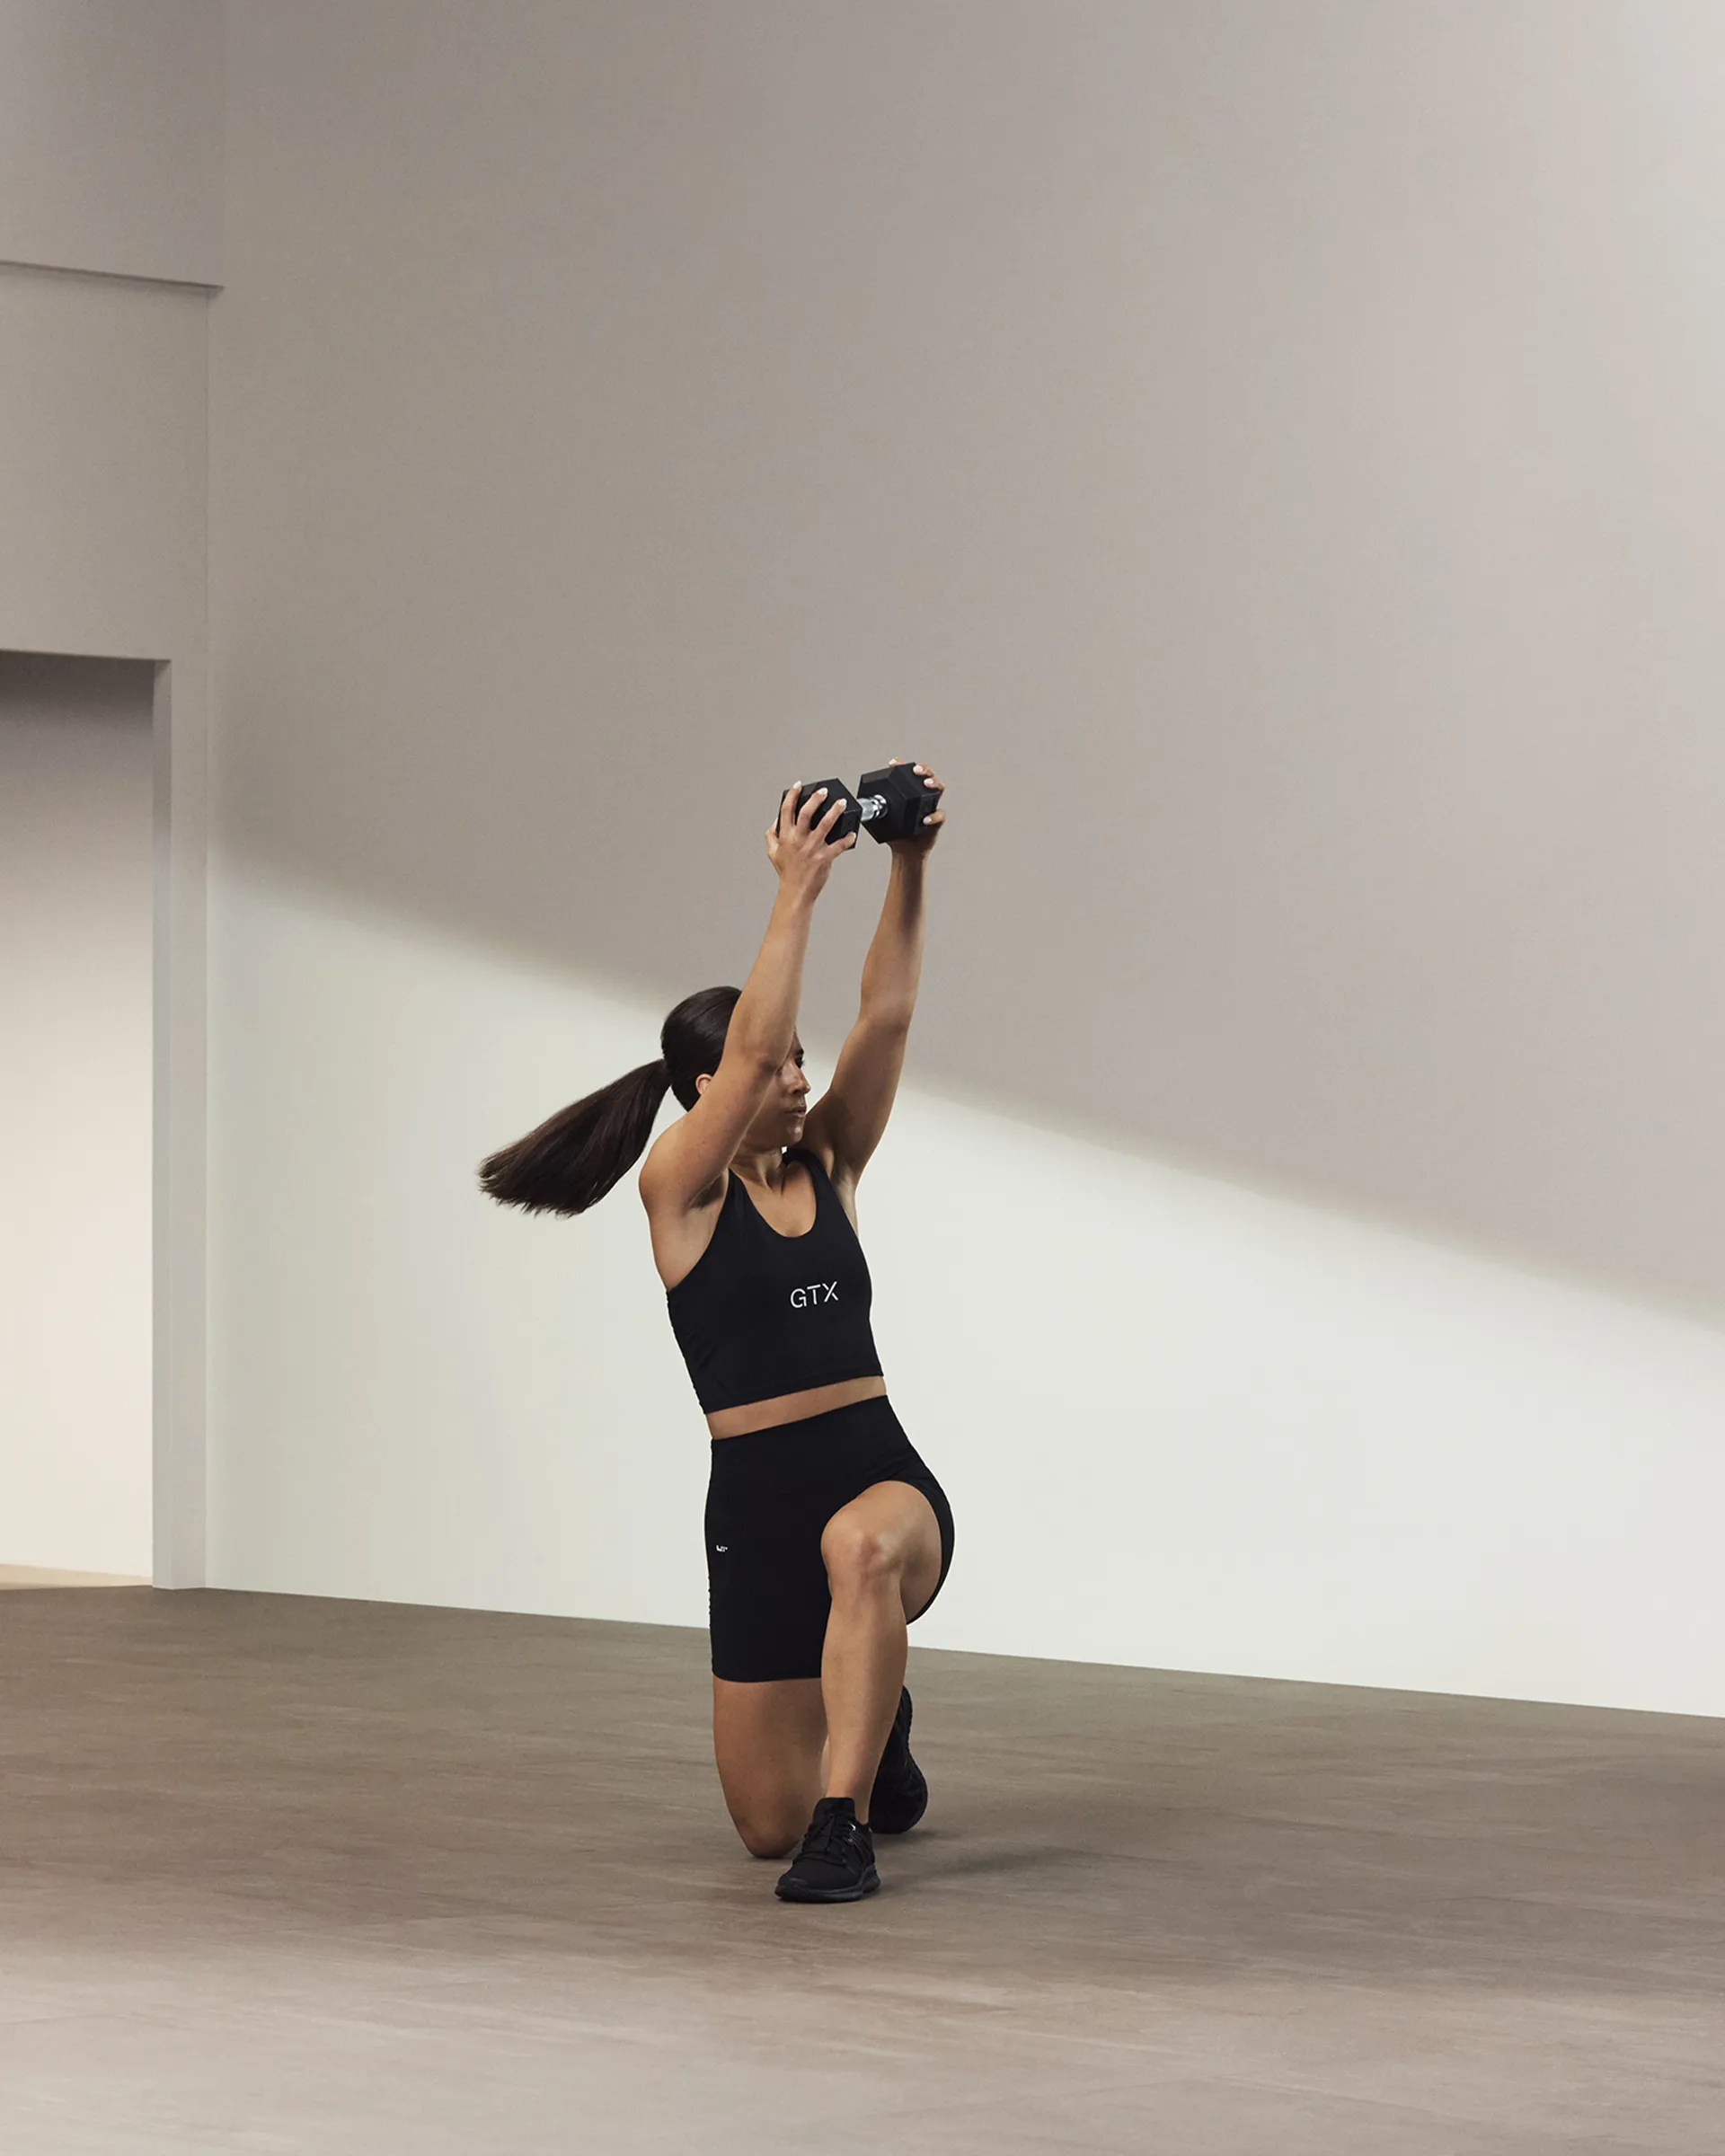 A Life Time member on one knee and holding a dumbbell overhead.